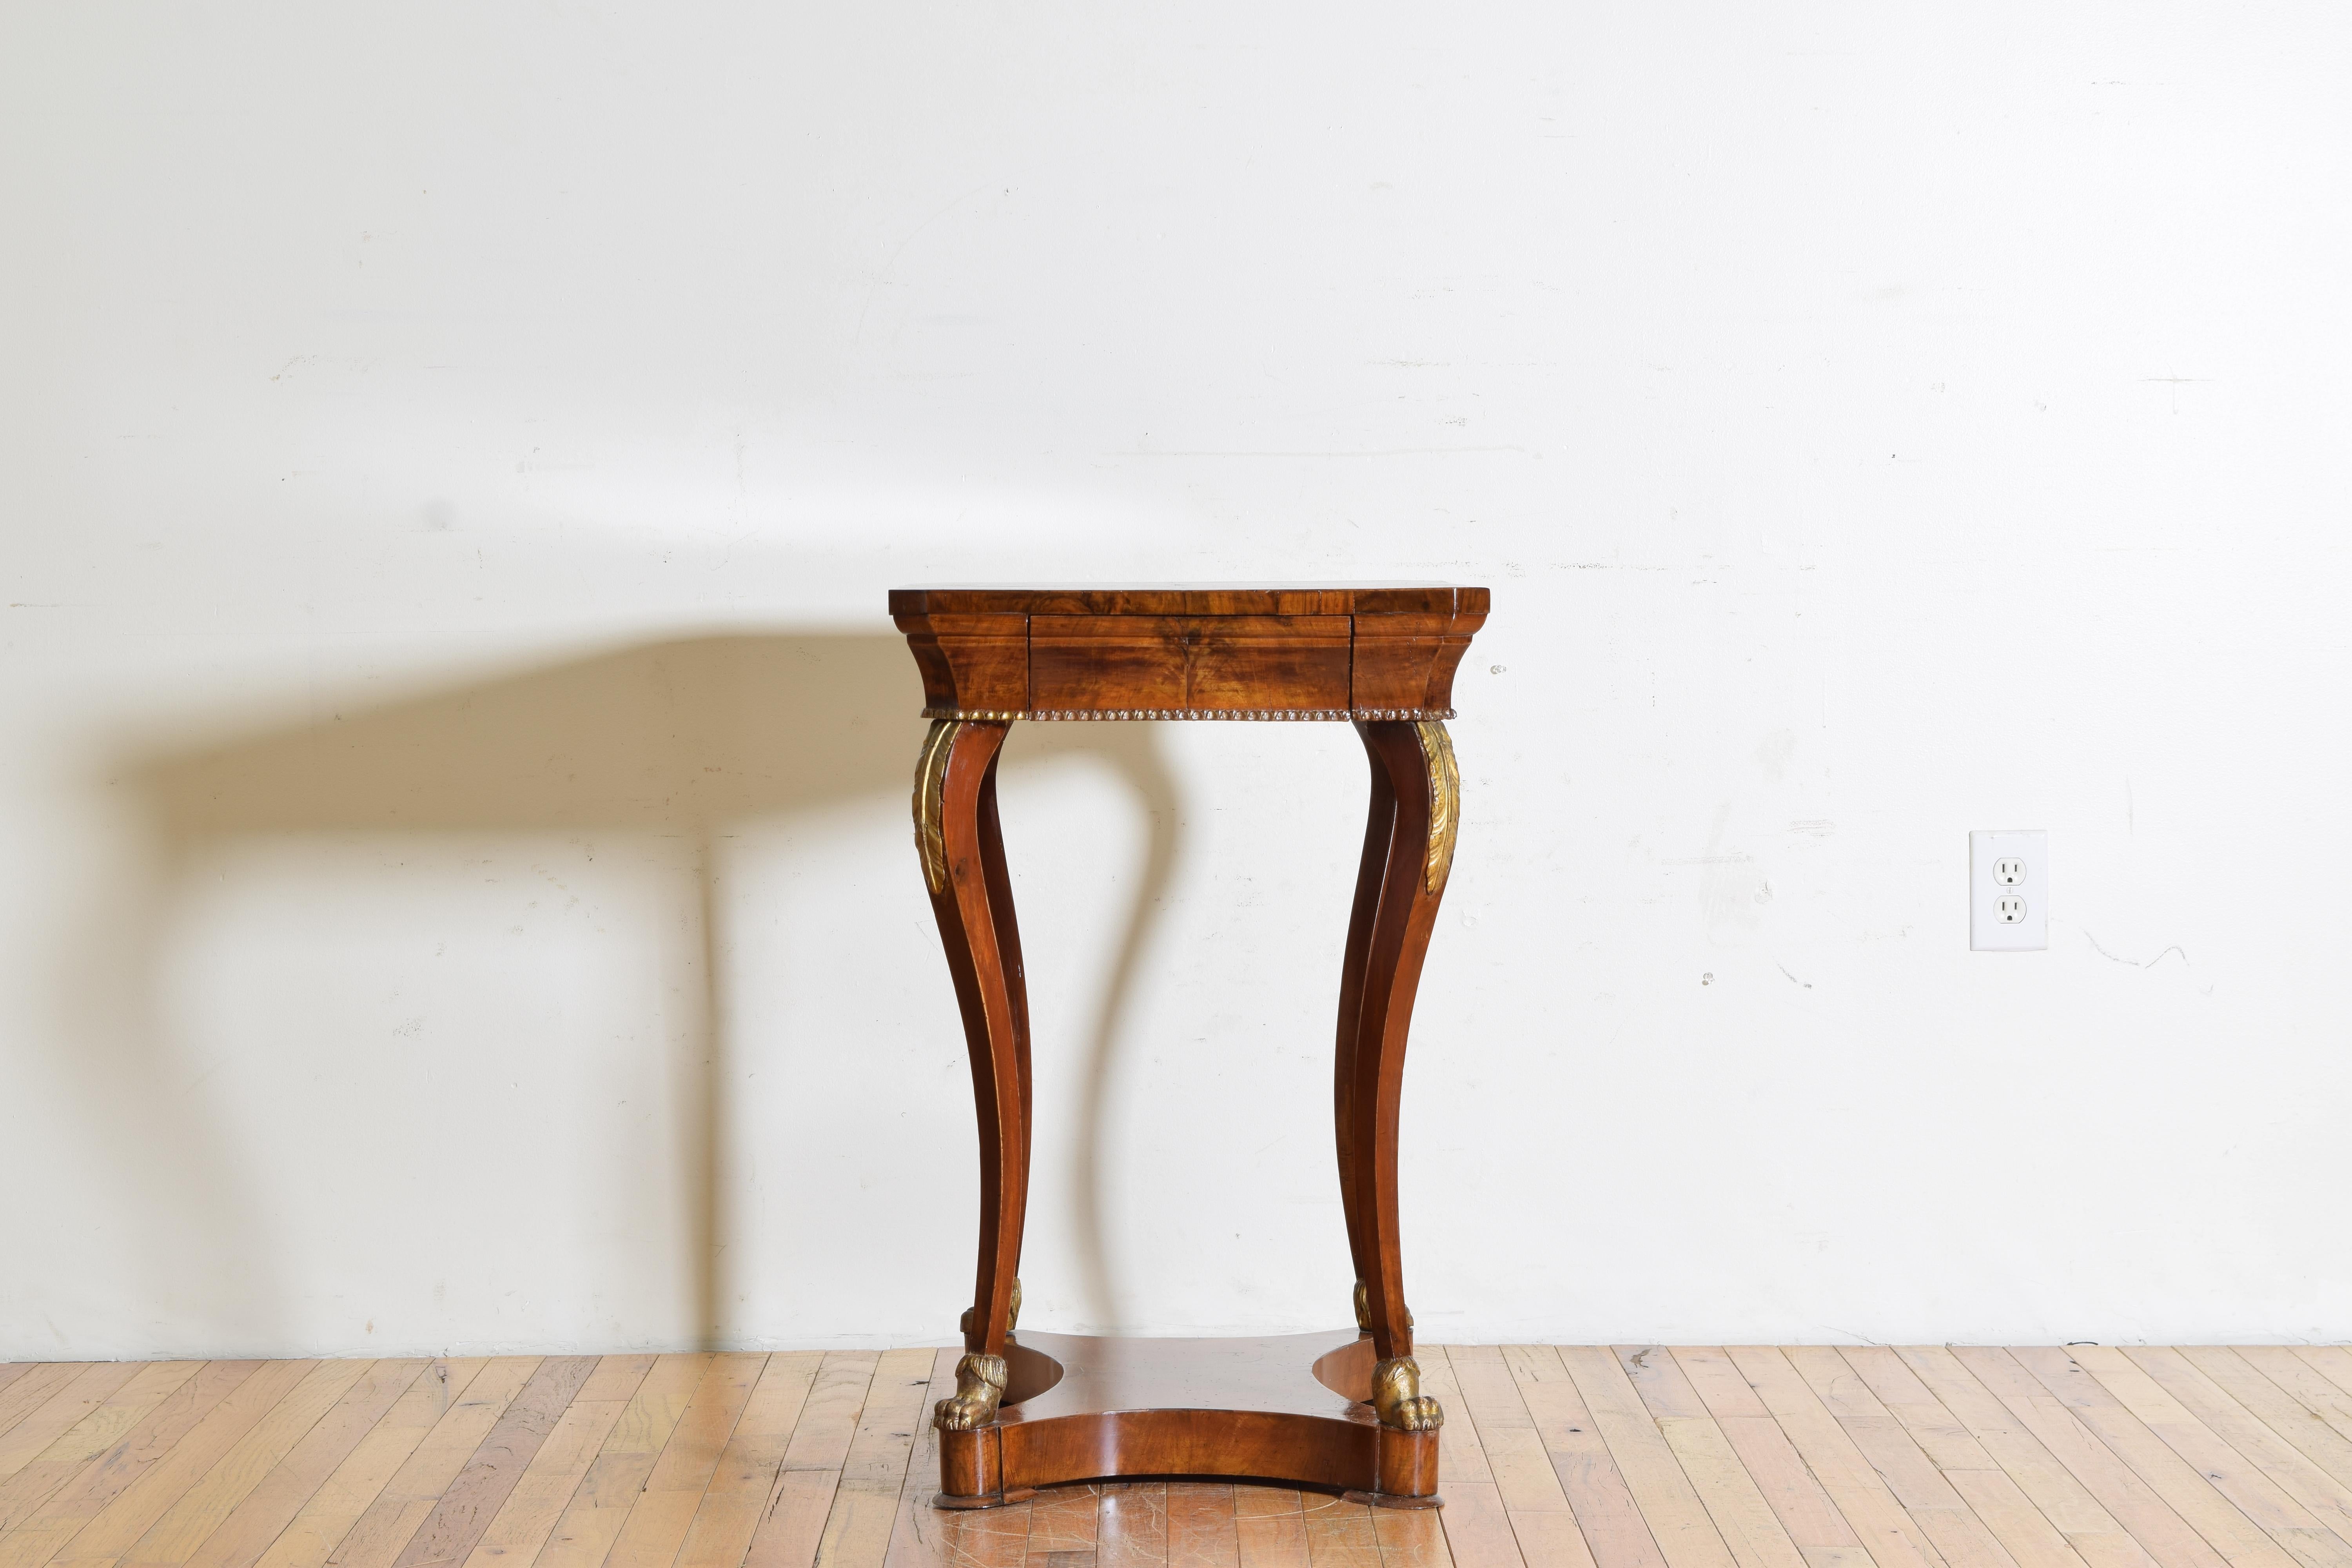 Early 19th Century Italian, Lucca, Late Empire Period Walnut and Giltwood 1-Drawer Table, ca. 1820